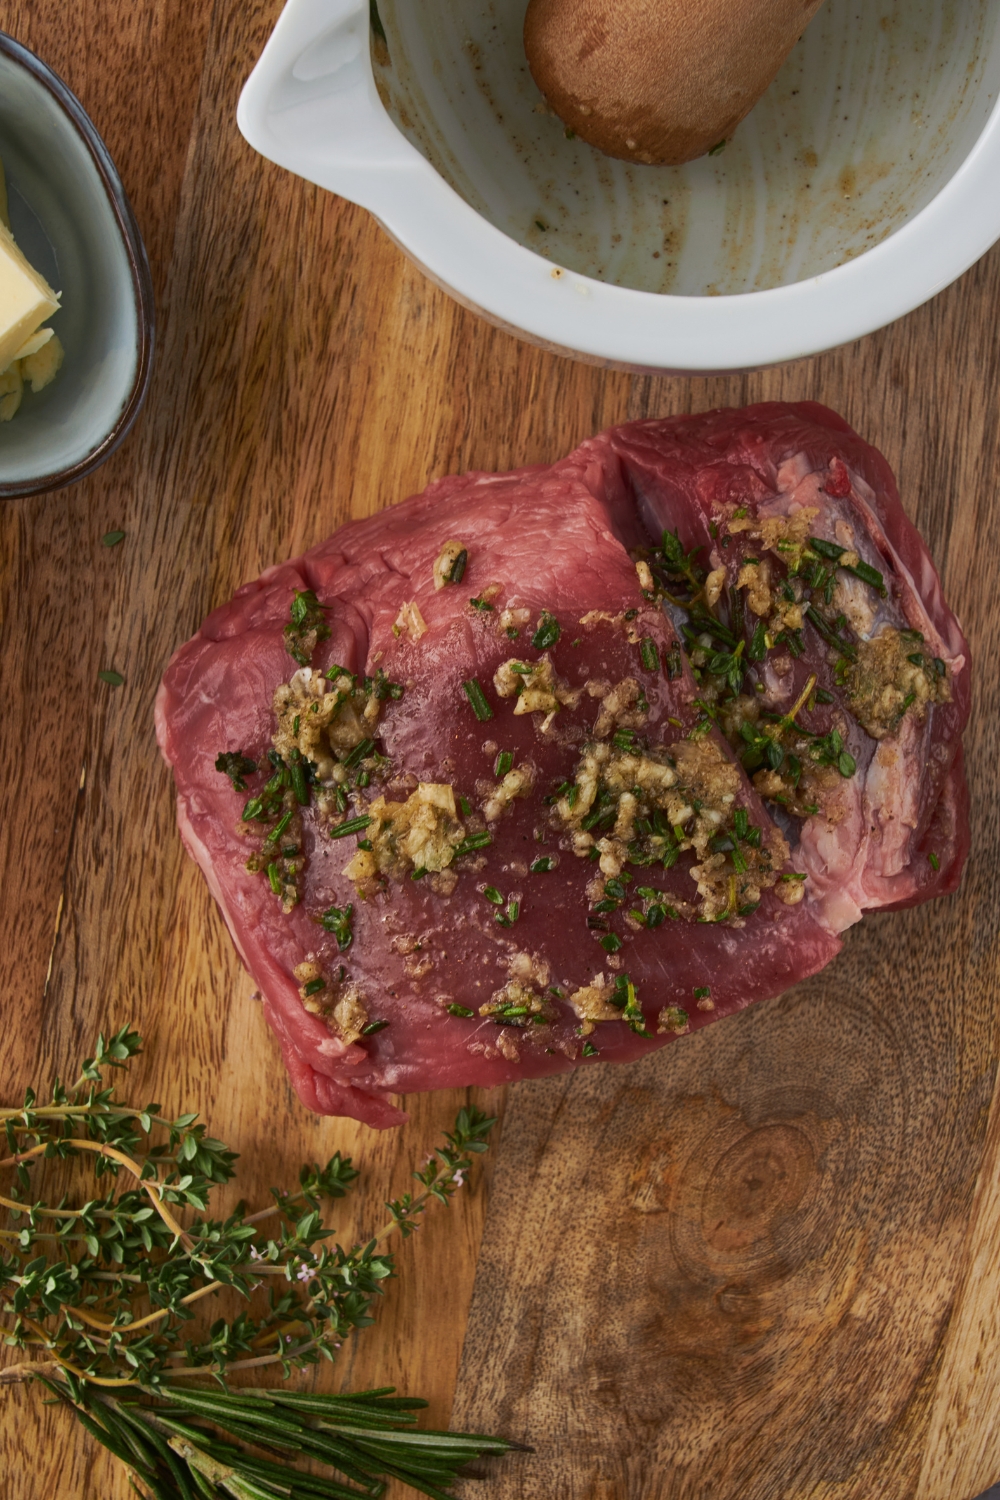 A beef tenderloin seasoned with herbs and garlic on a wooded board.